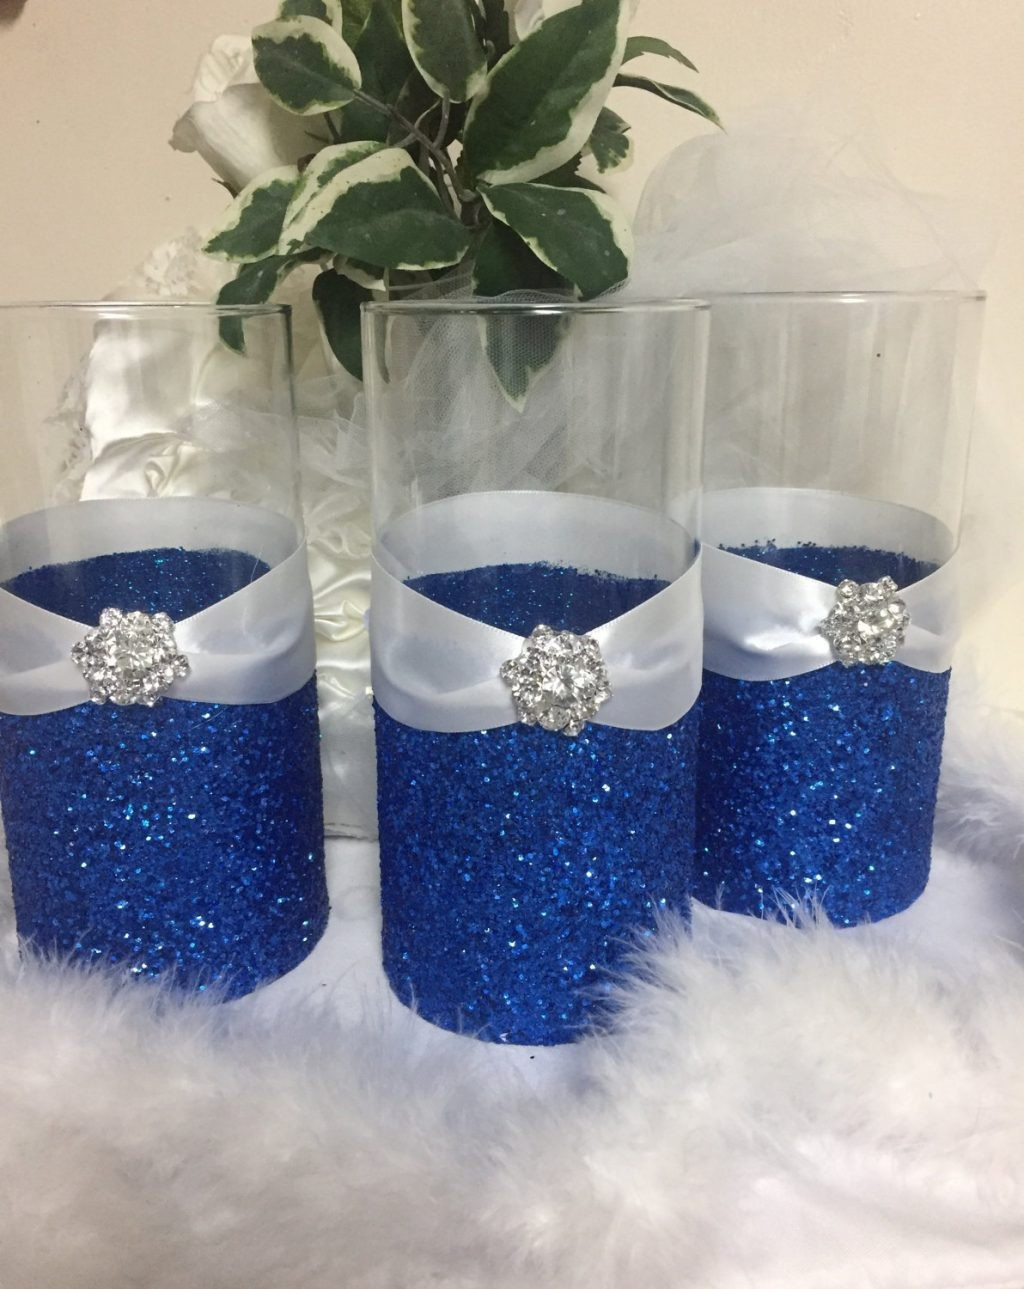 23 Awesome Black Vase Centerpieces 2024 free download black vase centerpieces of wedding decorations centerpieces beautiful tallh vases glitter vase in wedding decorations centerpieces beautiful tallh vases glitter vase centerpiece diy vasei 0d